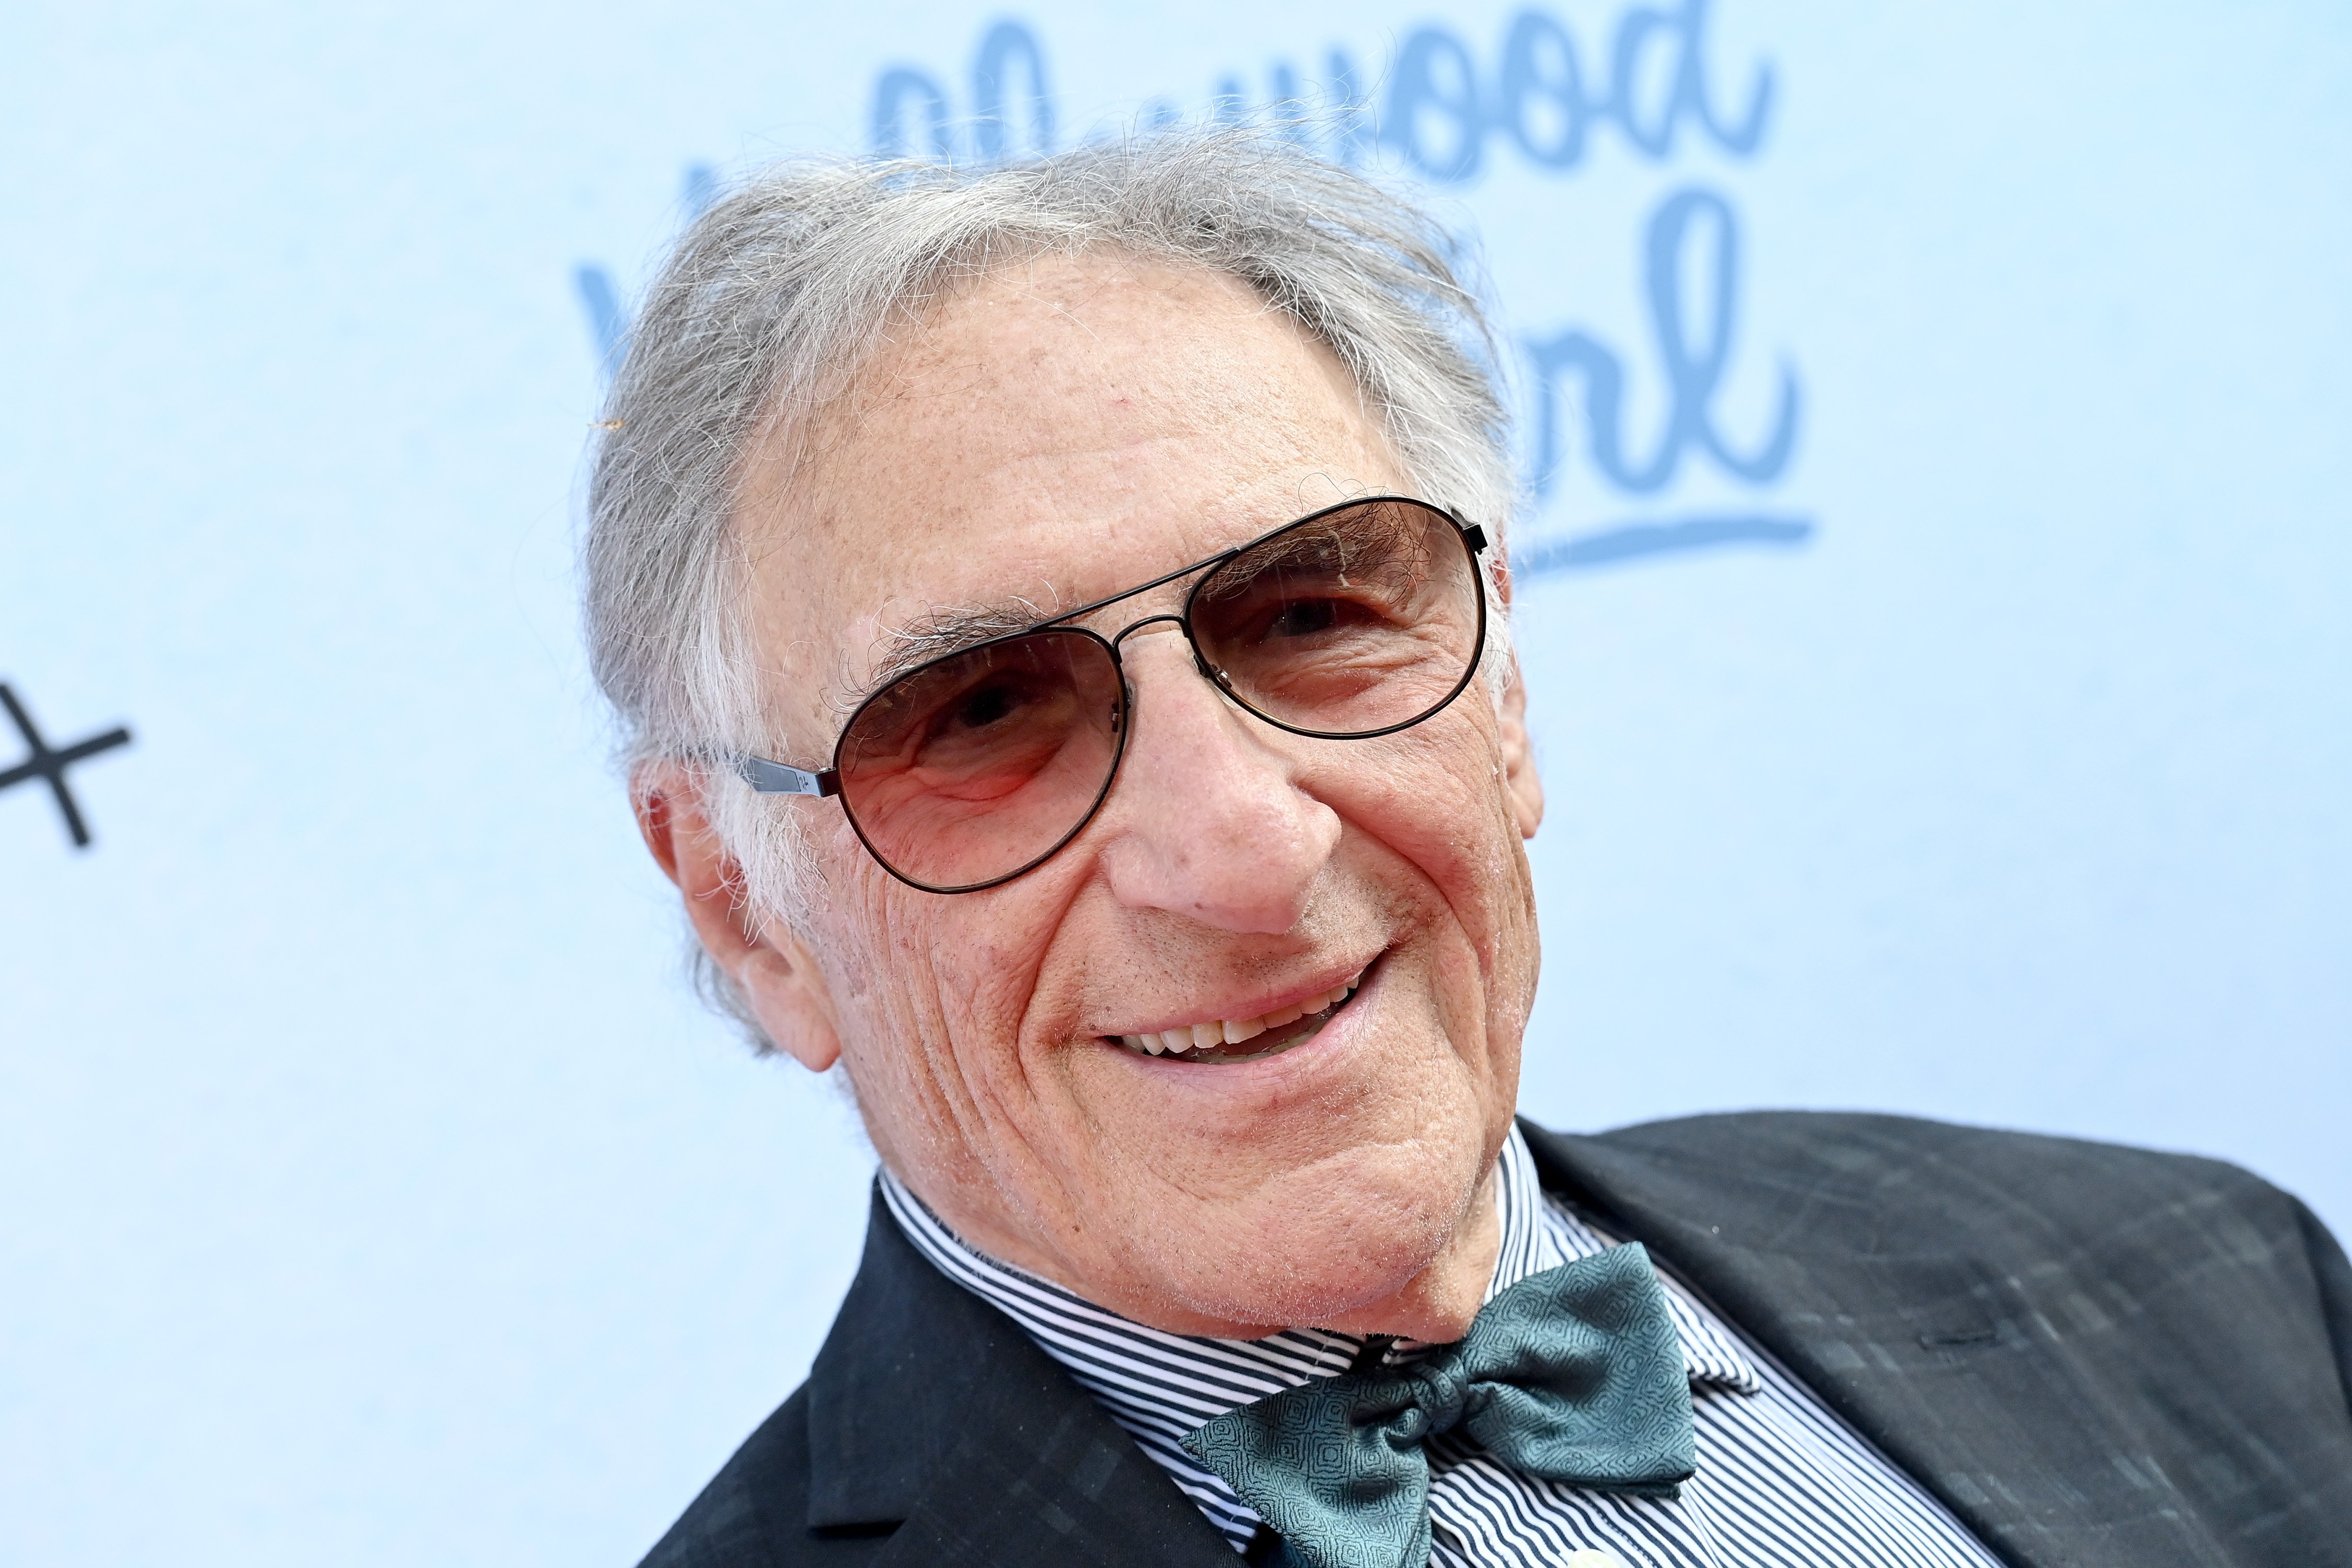 Judd Hirsch at the "Hollywood Stargirl" Premiere on May 23, 2022, in Los Angeles, California. | Source: Getty Images